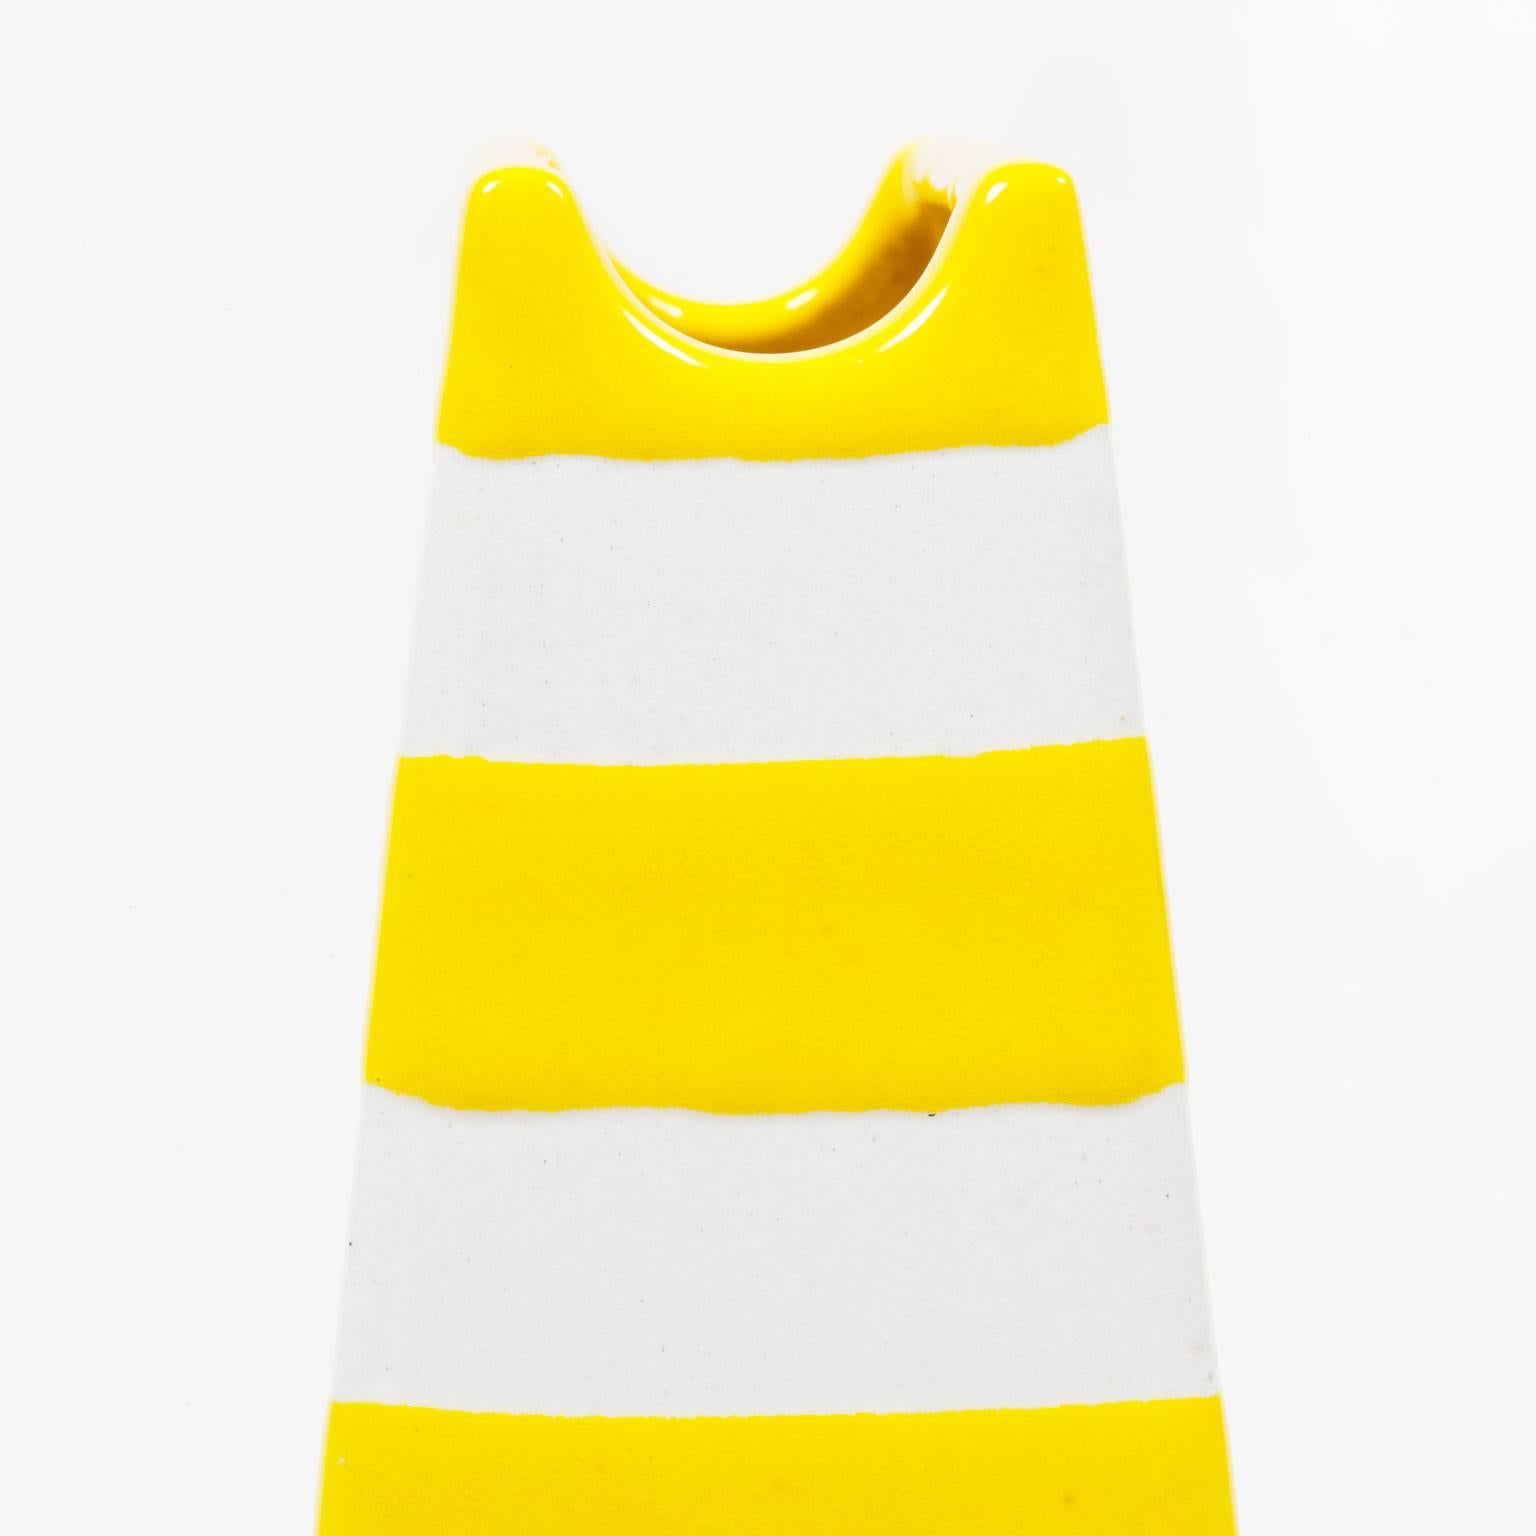 Unusual Italian yellow striped geometric ceramic vase in the manner of Ettore Sottsass. Produced by Bitossi for Raymor.